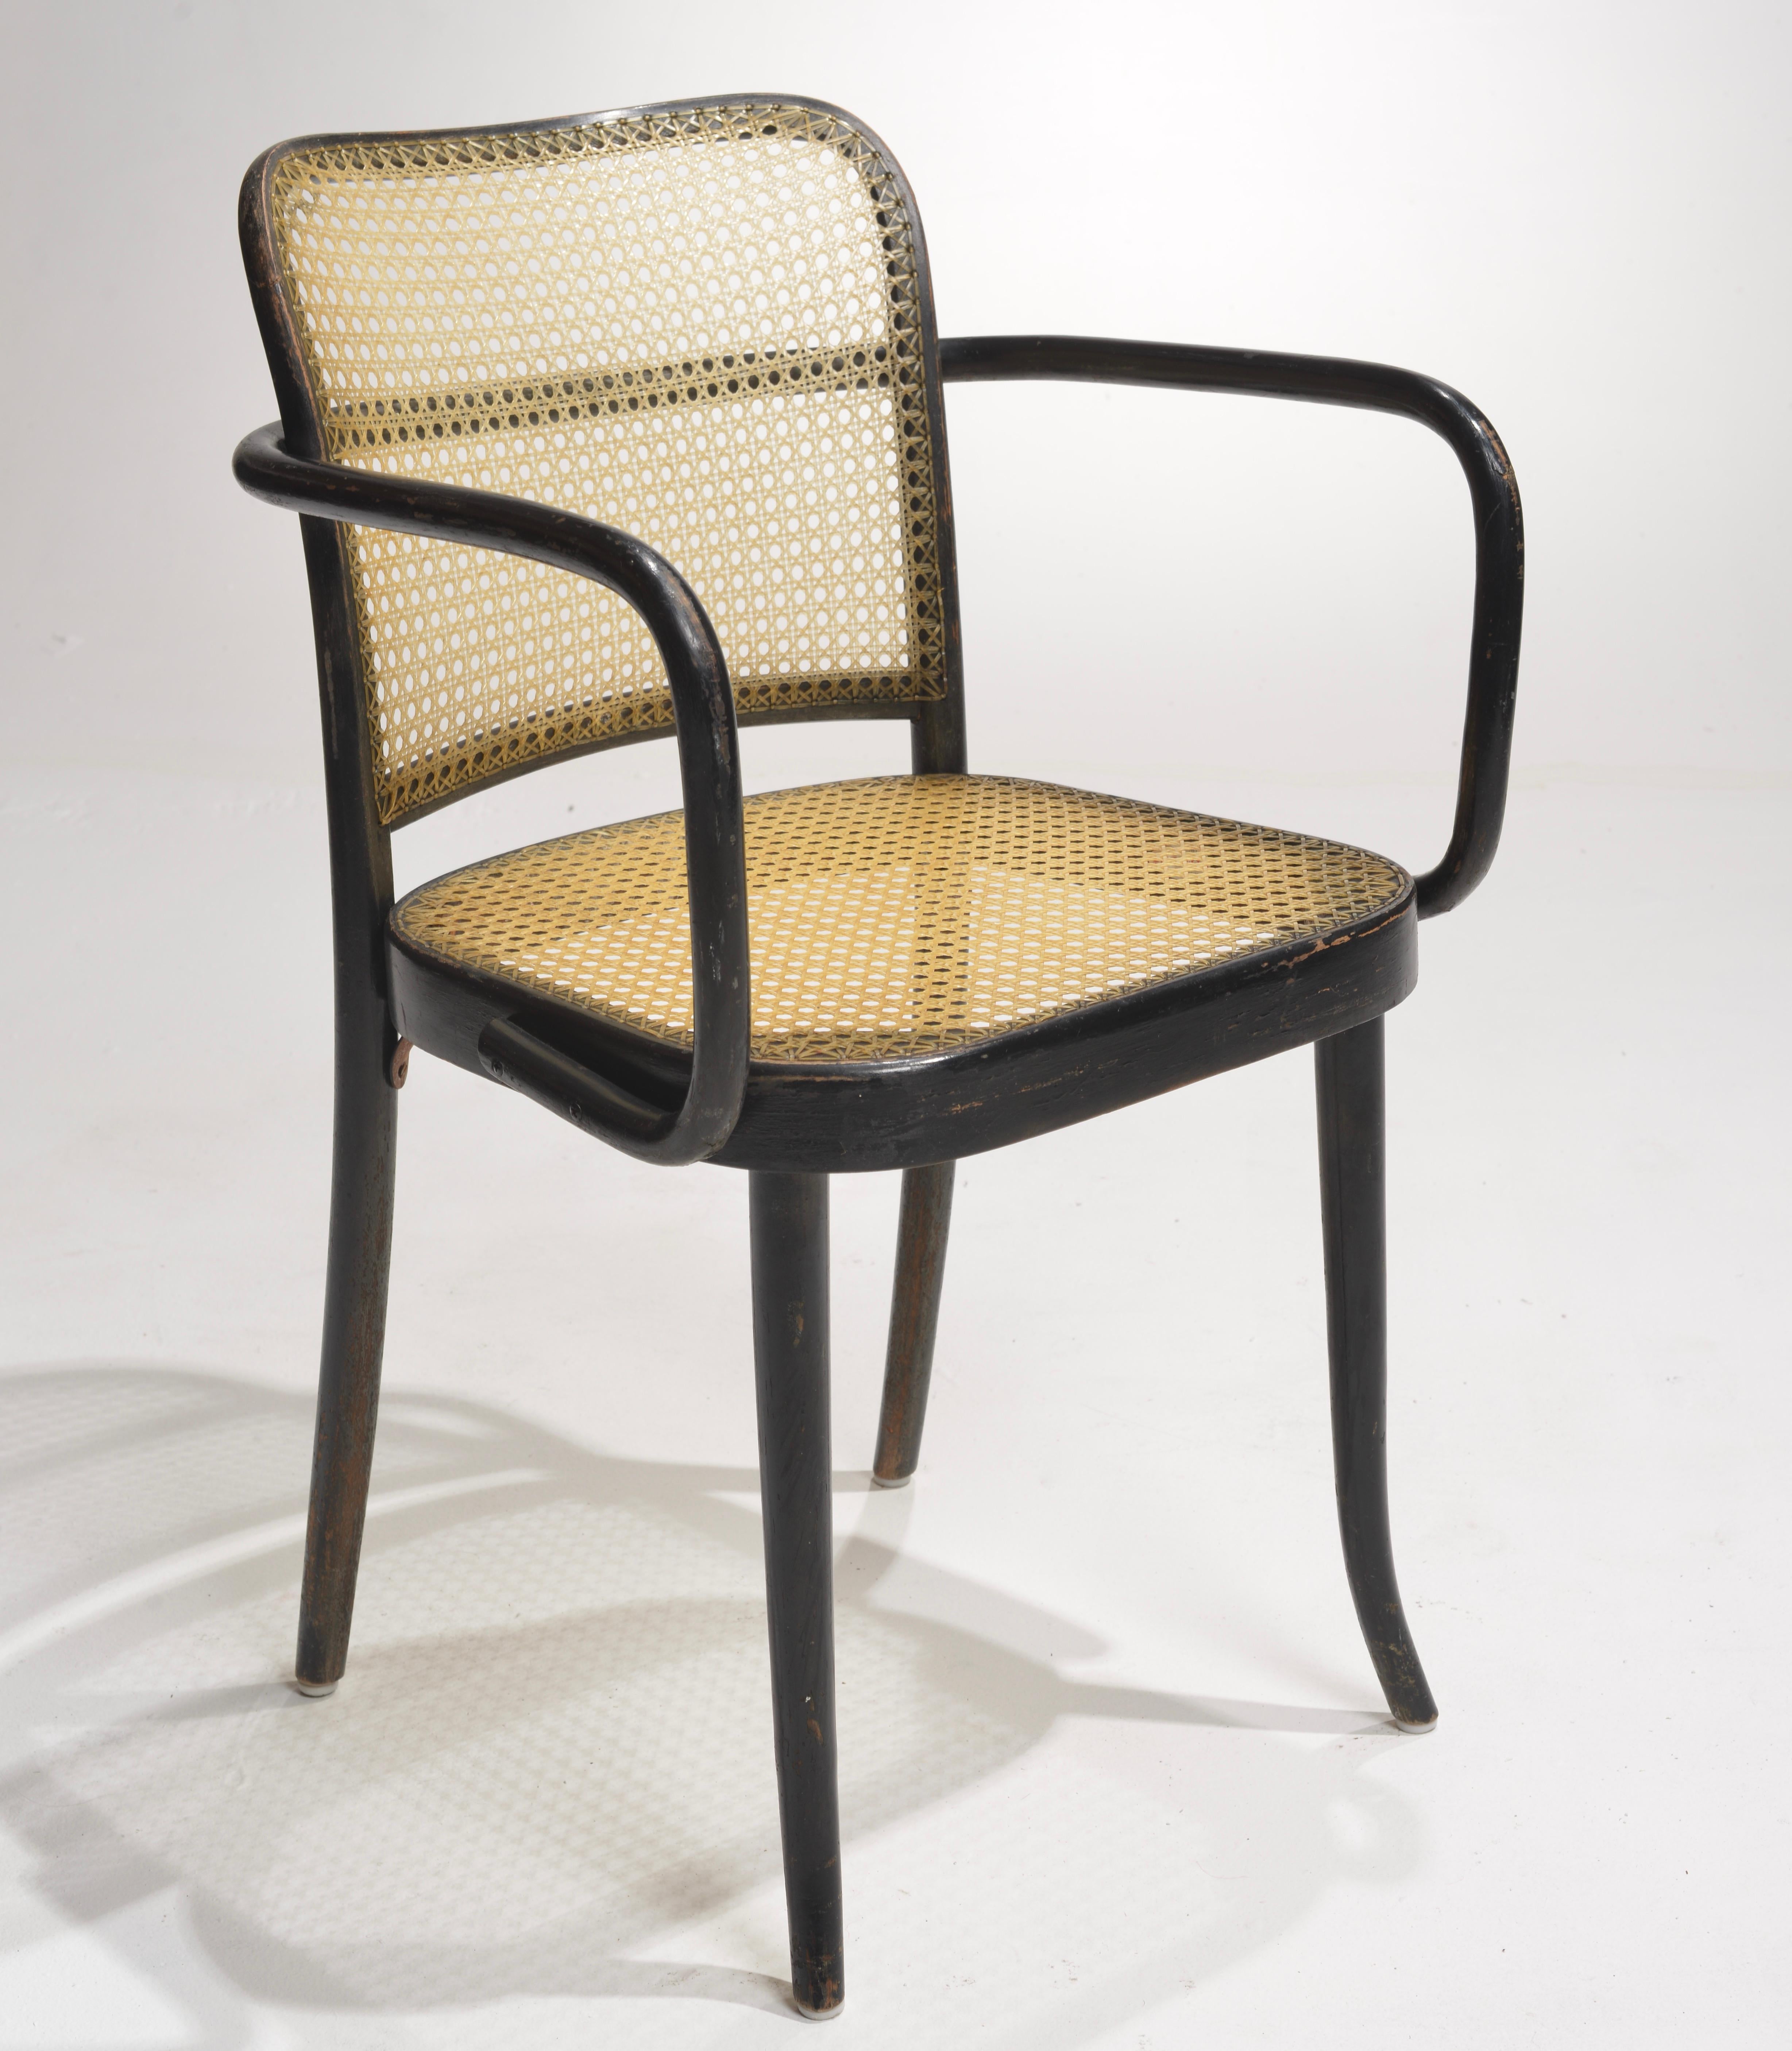 Josef Hoffmann Bentwood Beech Prague Model 811 Chairs in Black and Leather Weave For Sale 4